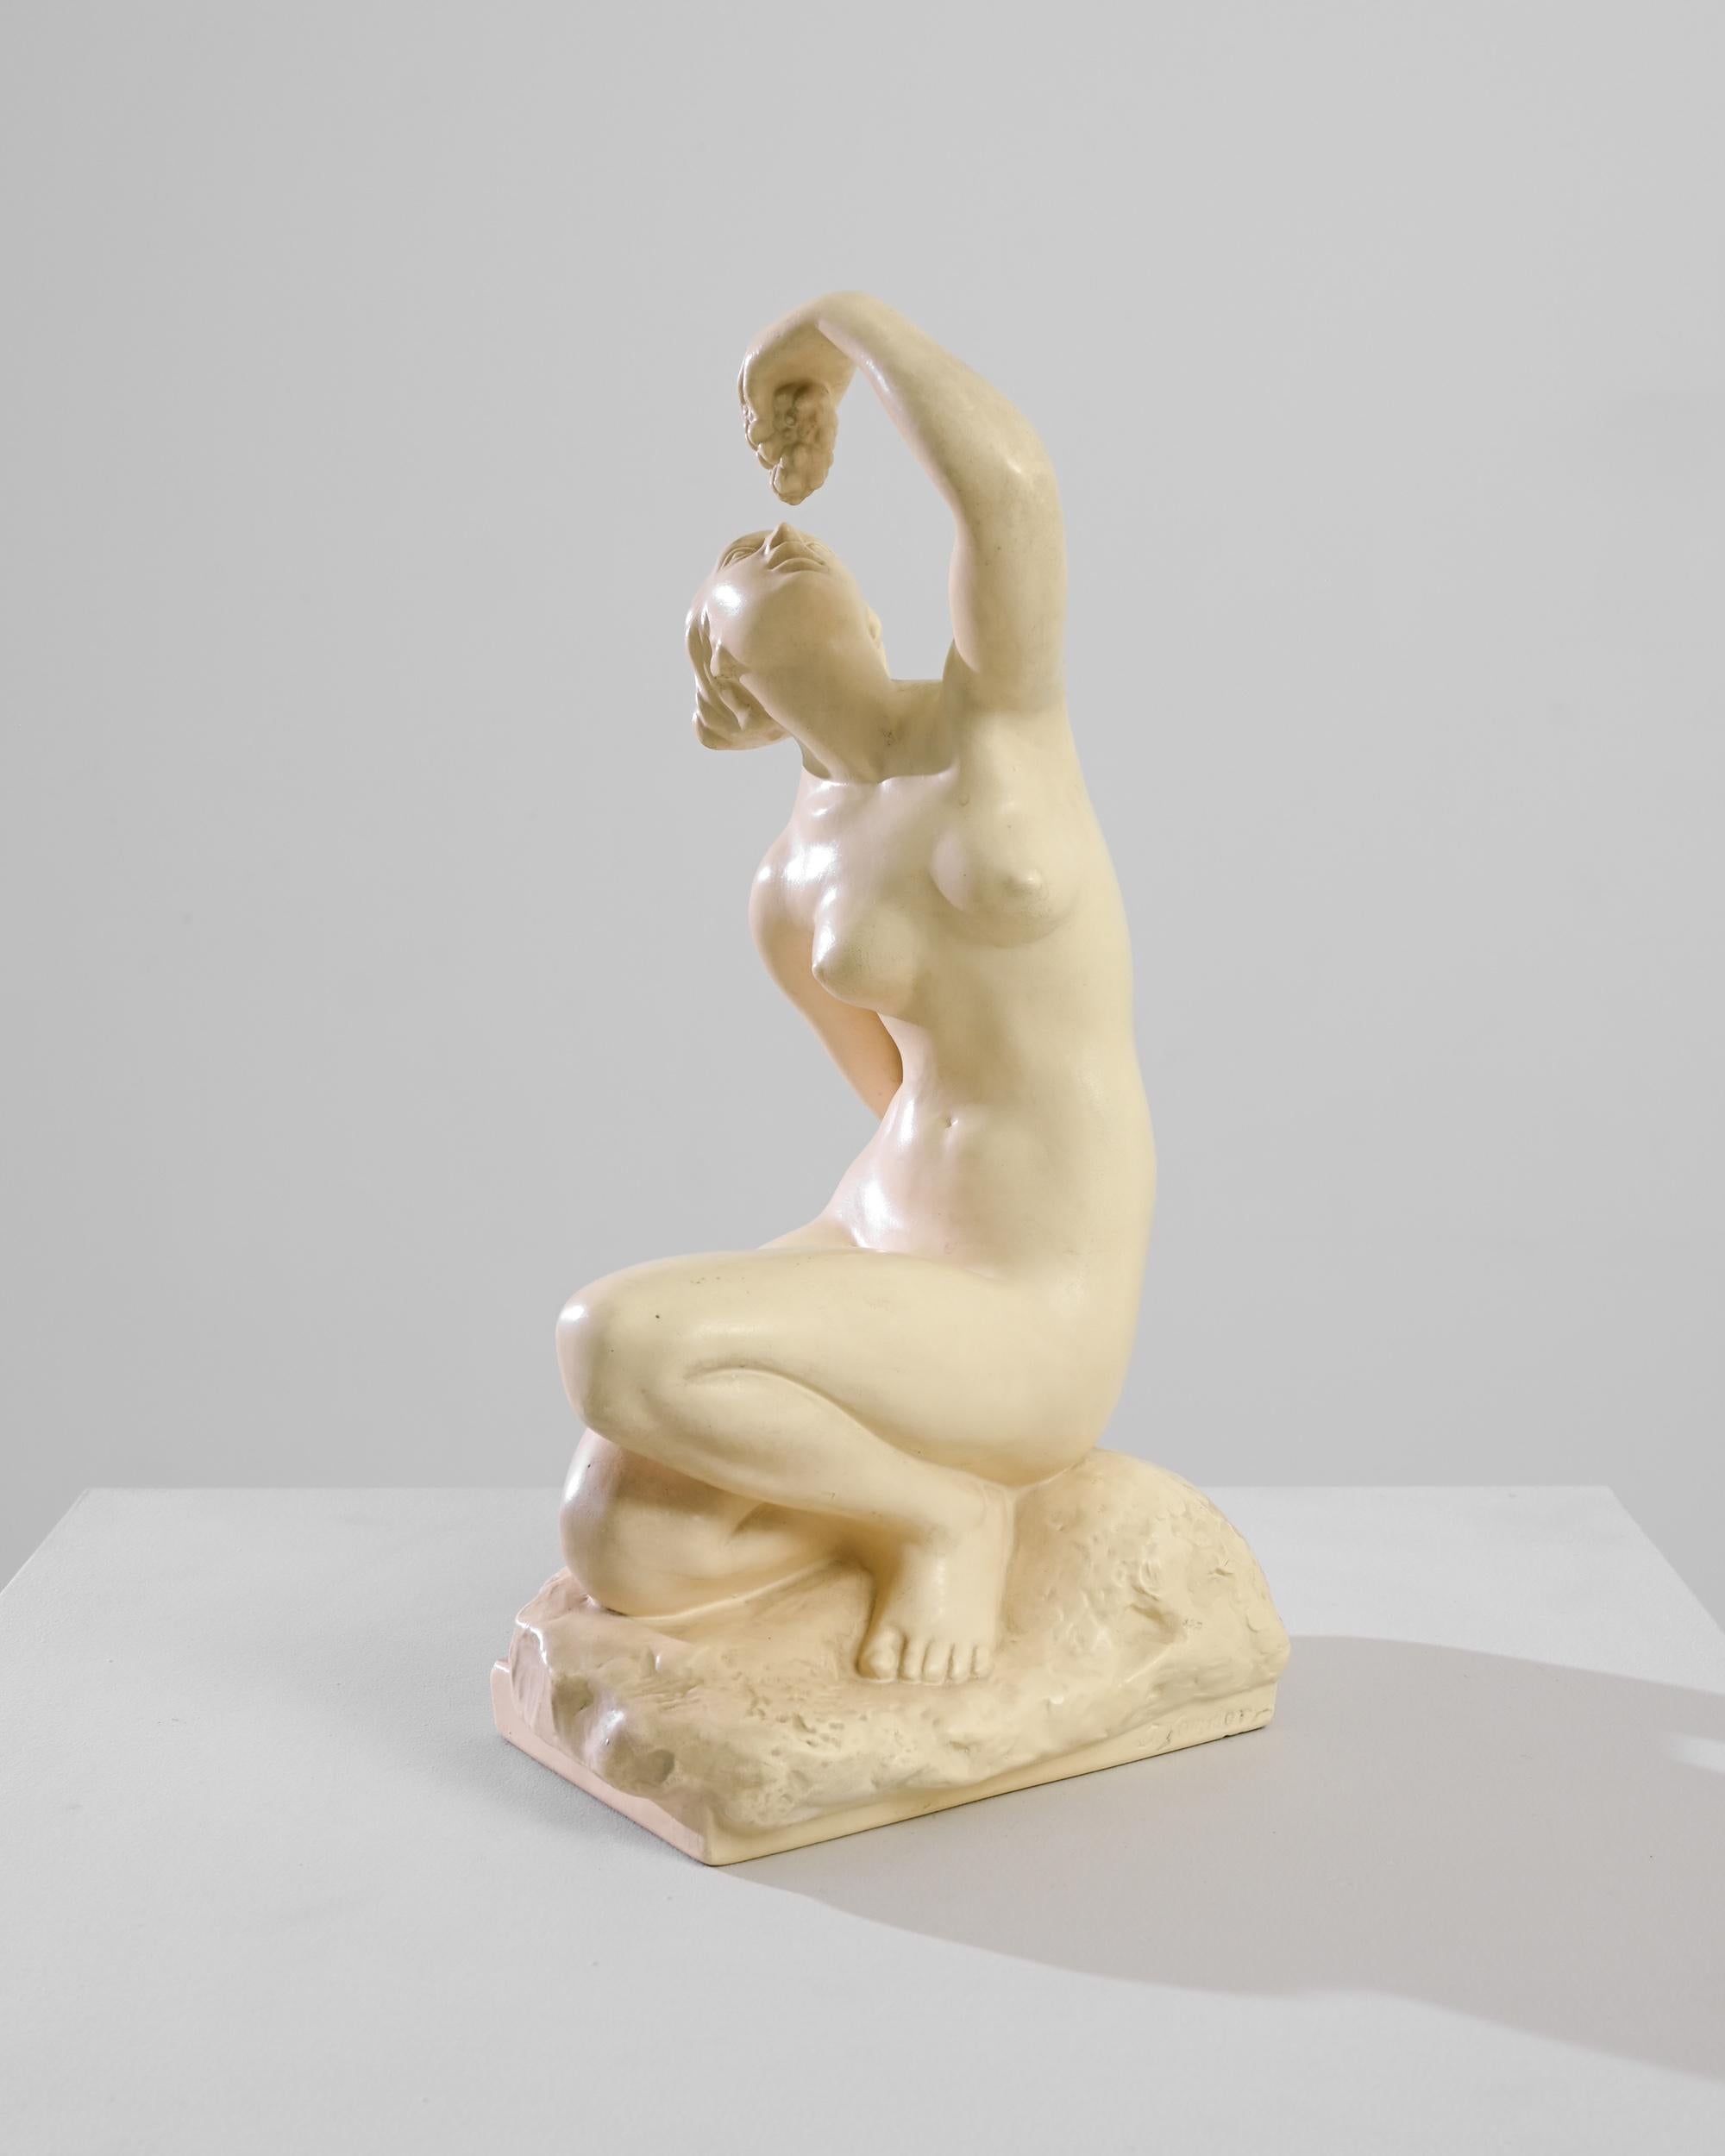 This 20th-century Central European plaster sculpture portrays a timeless scene of indulgence—a woman captured in the act of eating grapes. The elegance of the moment is immortalized in smooth plaster, with the curves and contours of her form